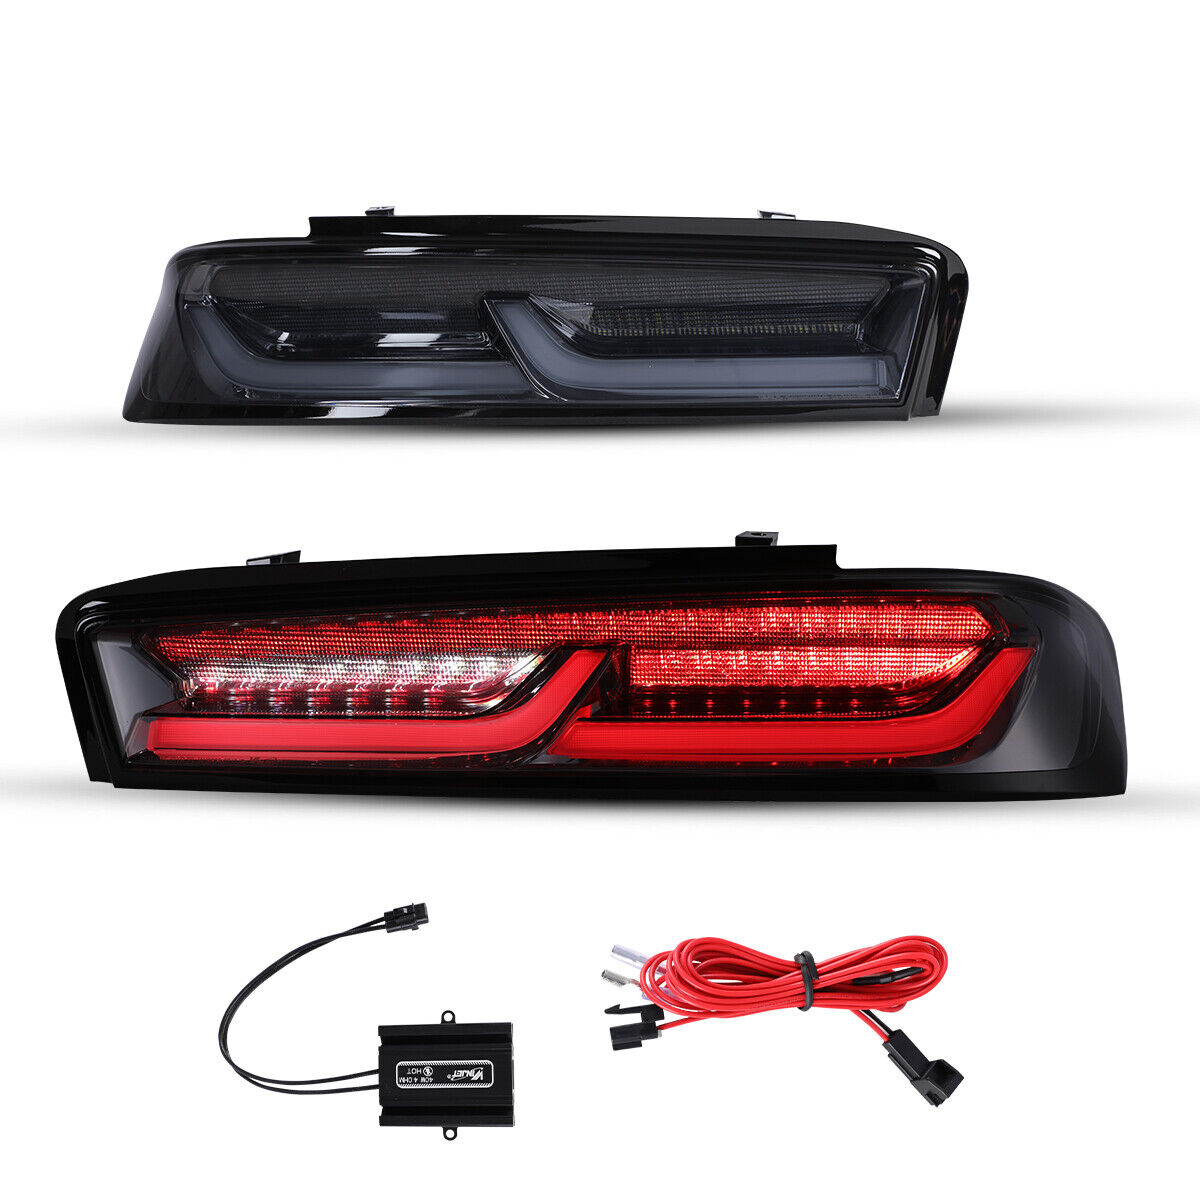 Smoke LED Sequential Tail Lights For 2016 2017 2018 Chevy Camaro Rear Lamps Pair